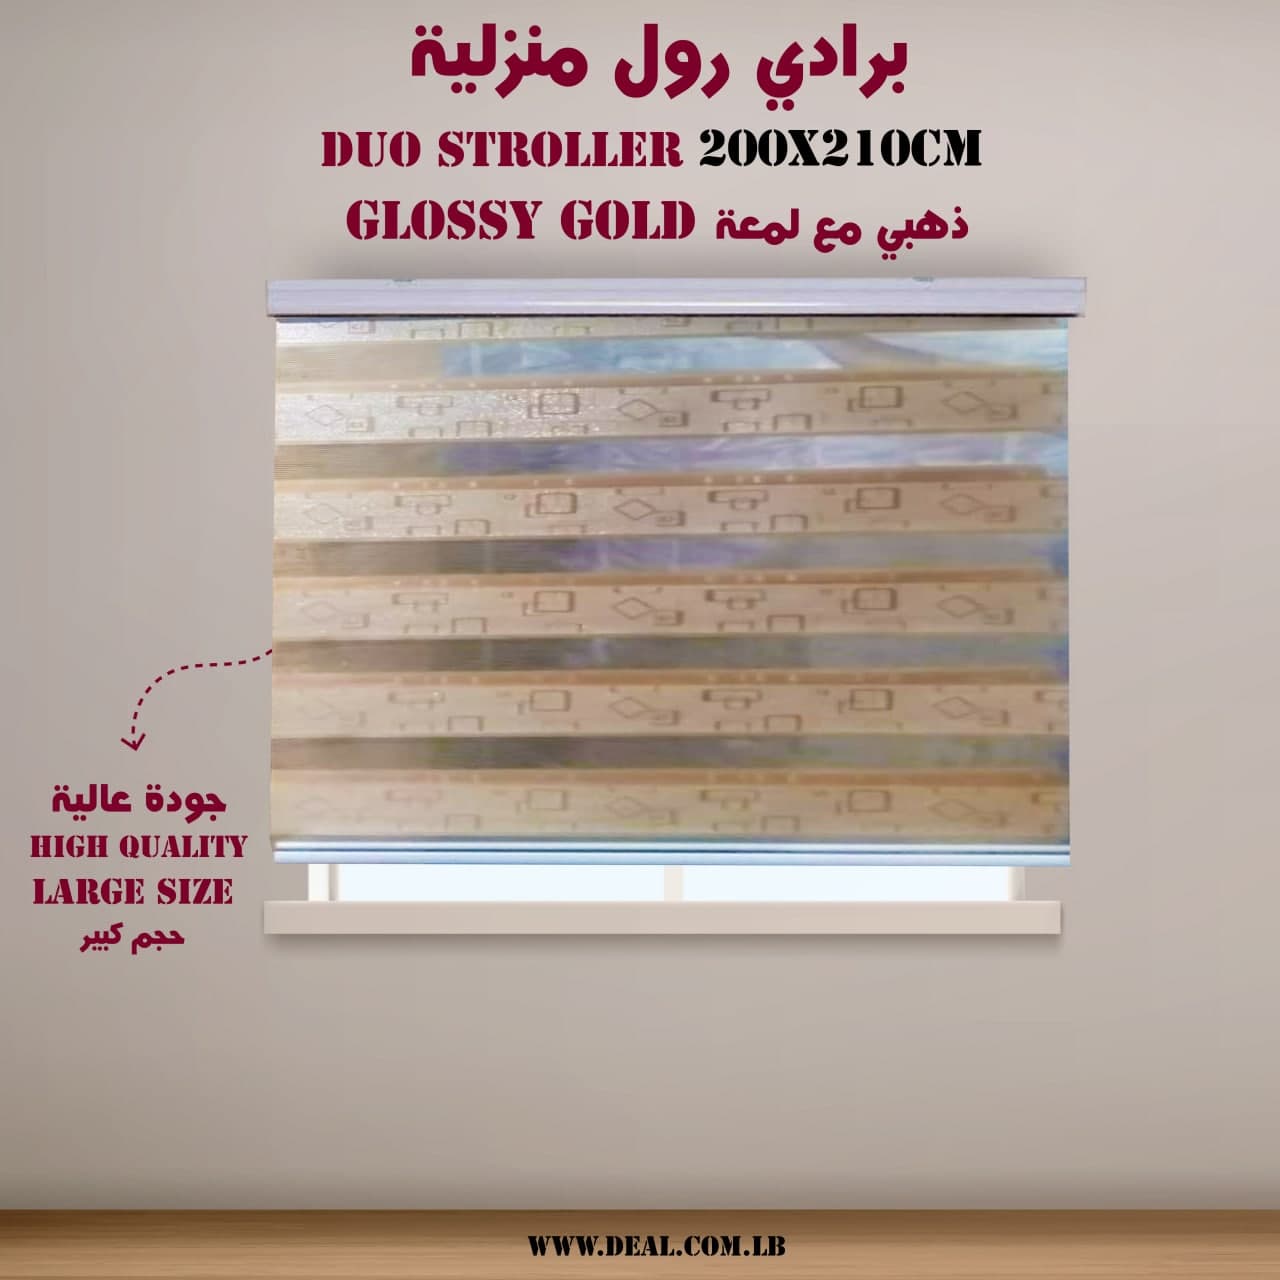 Glossy+Gold+Duo+Curtain+With+Shapes+Designs+200x210